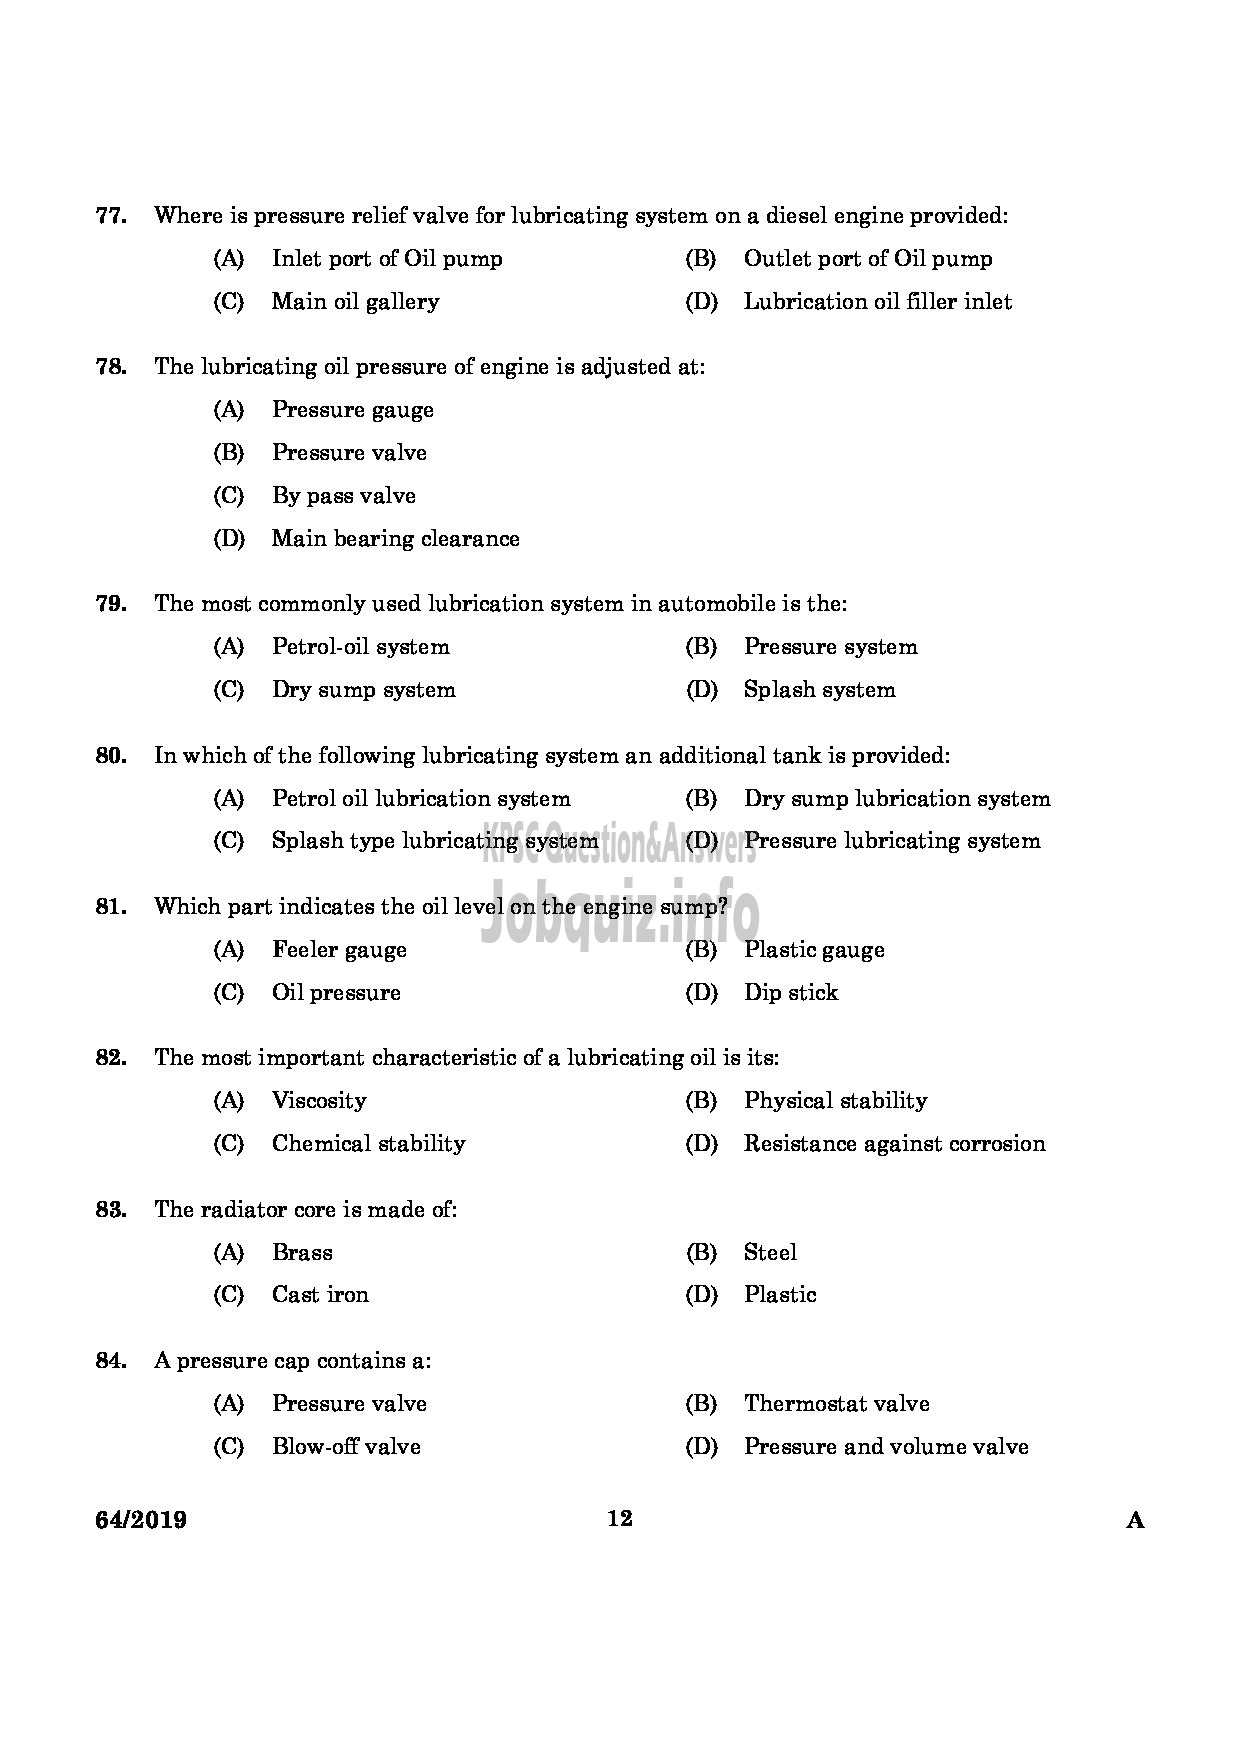 Kerala PSC Question Paper - DRILLING ASSISTANT GROUND WATER DEPARTMENT English -10